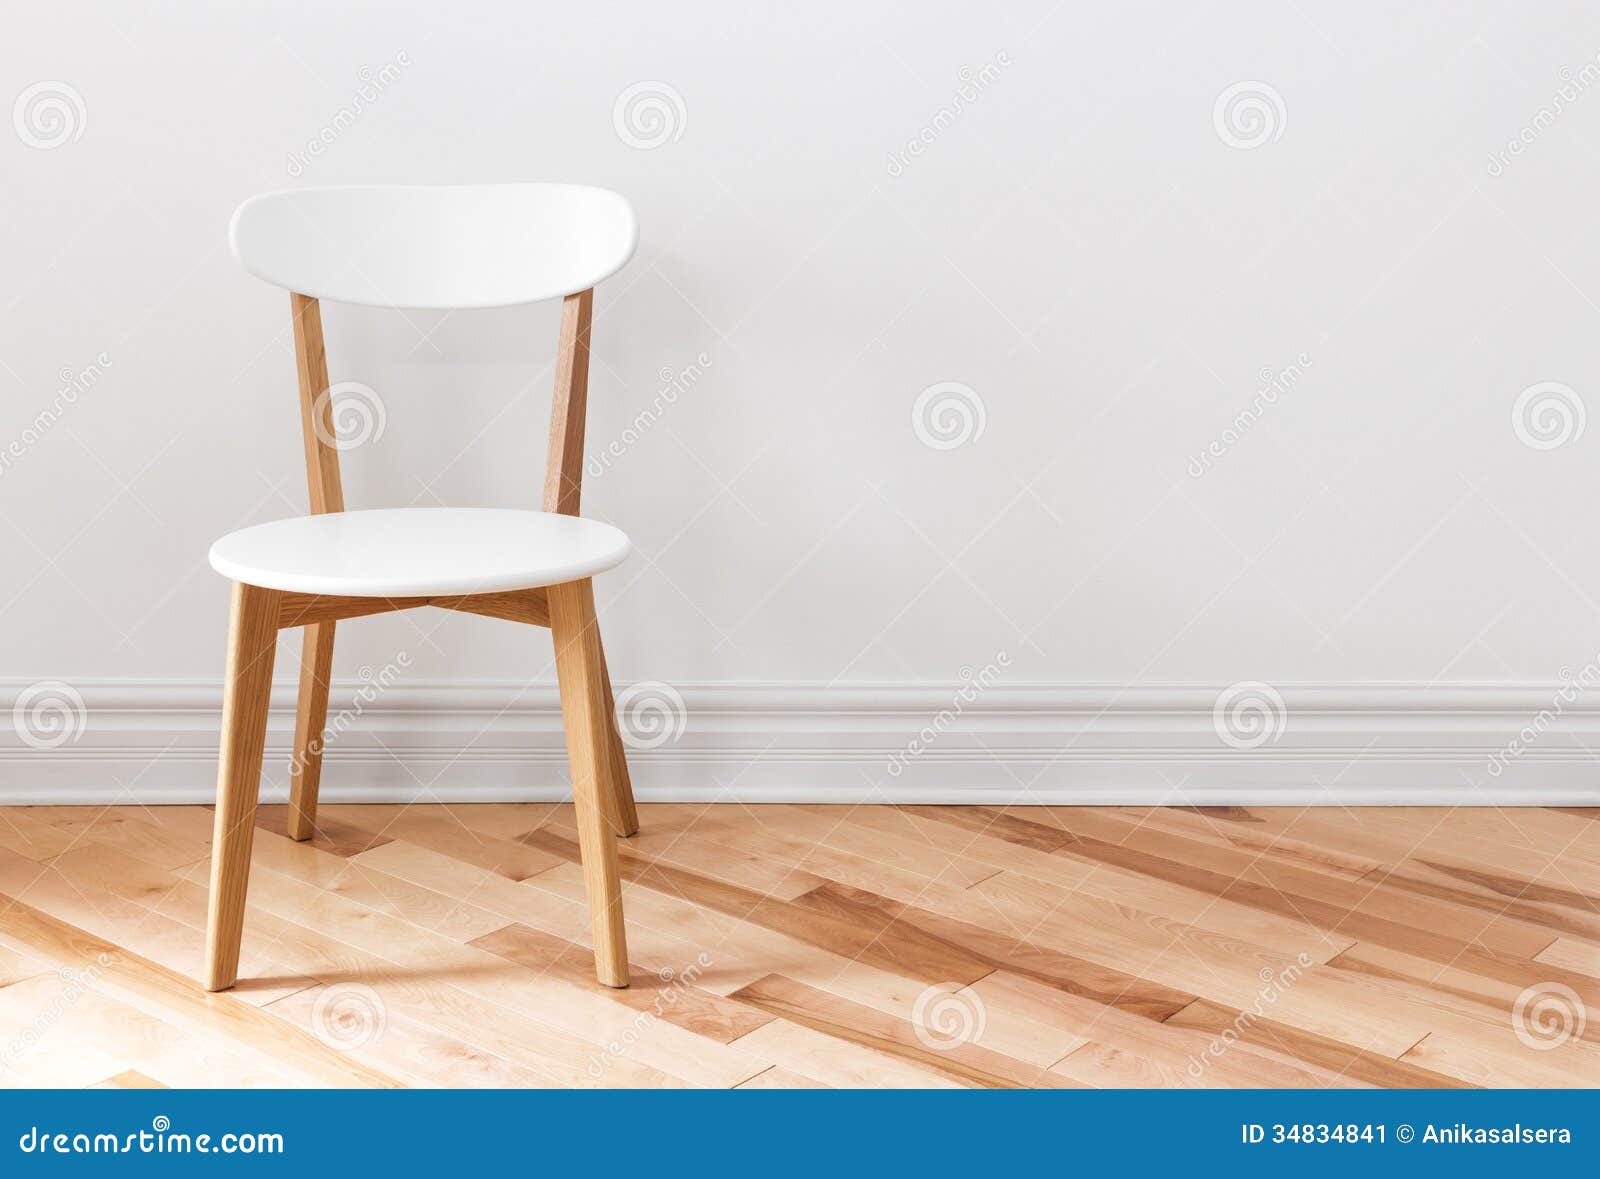 white chair in an empty room